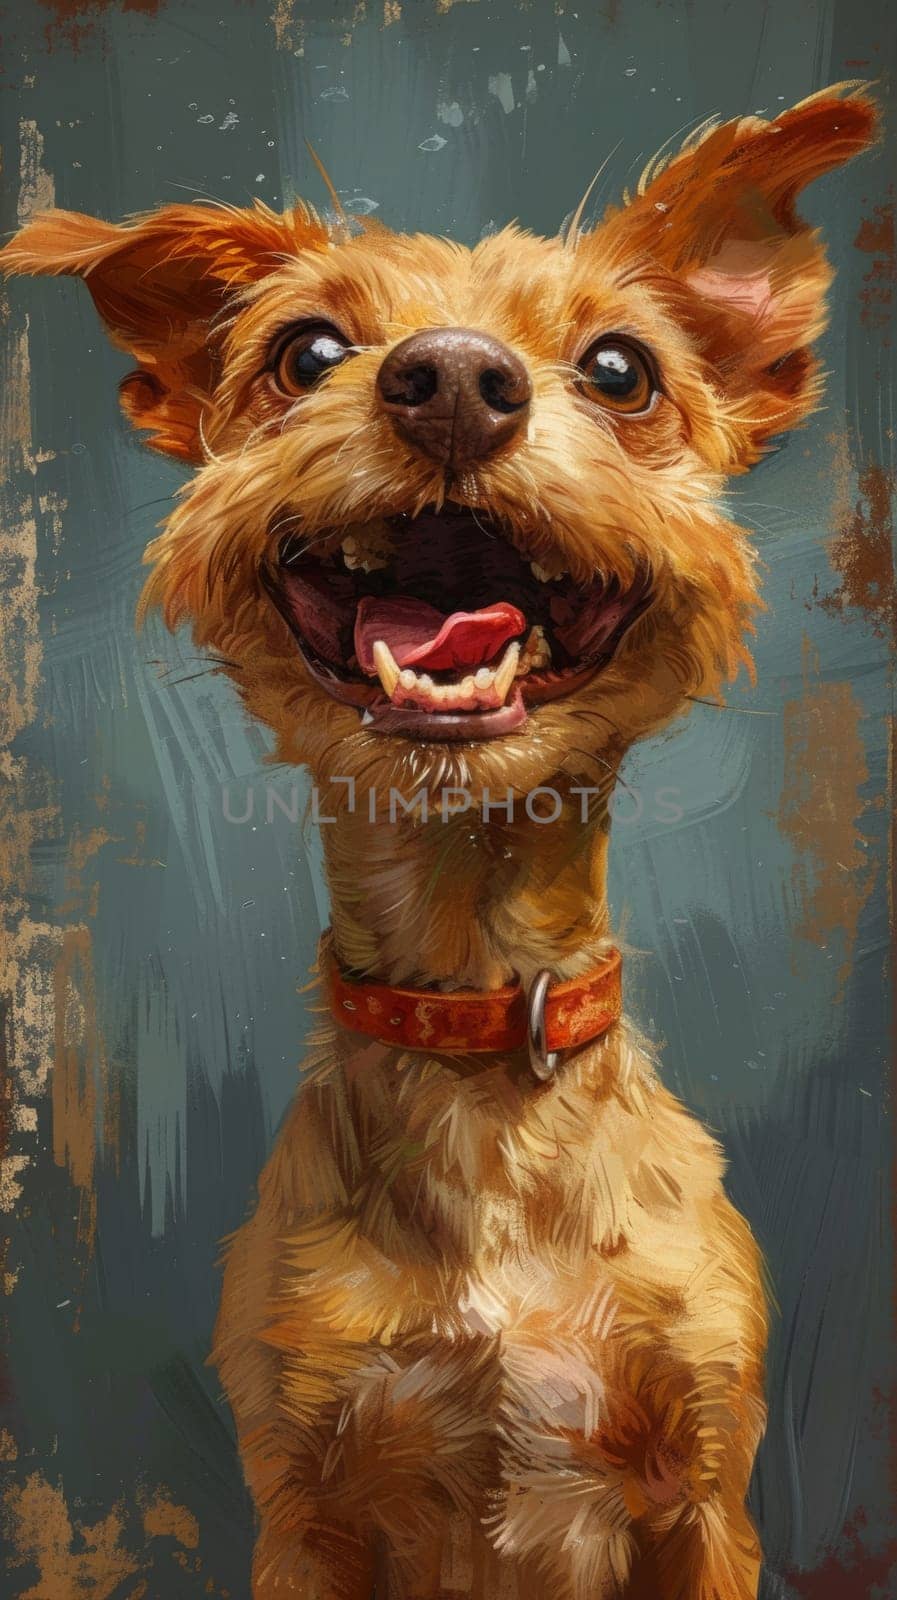 A painting of a small dog with its mouth open and tongue out, AI by starush